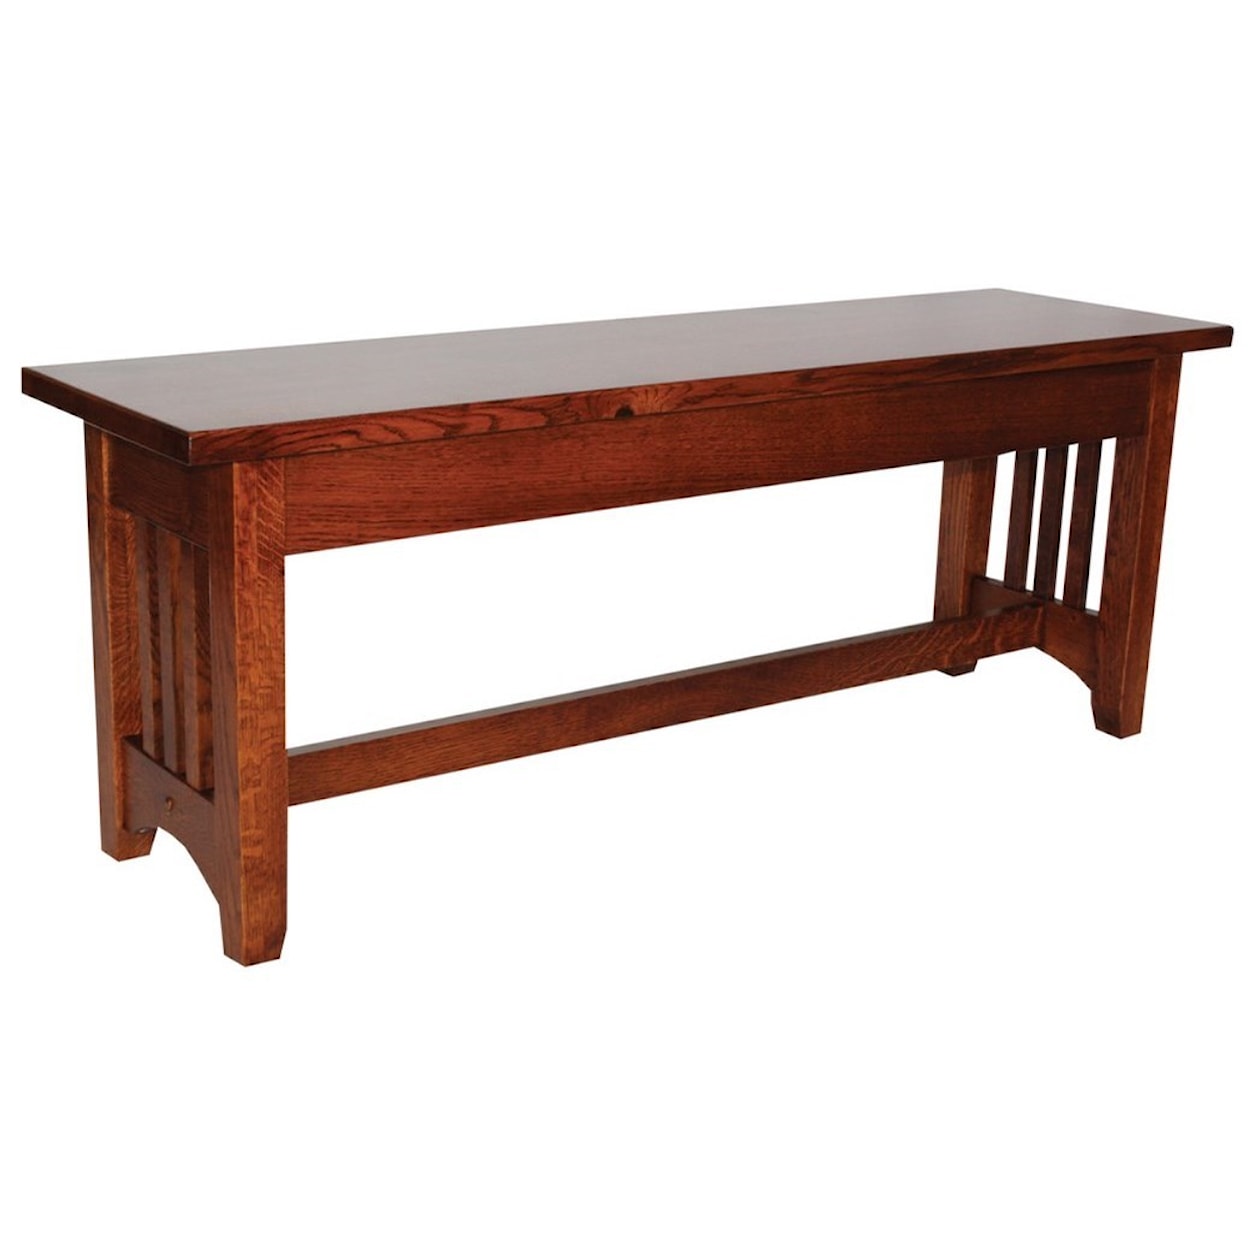 Ashery Woodworking Prairie Mission Customizable Solid Wood Bench